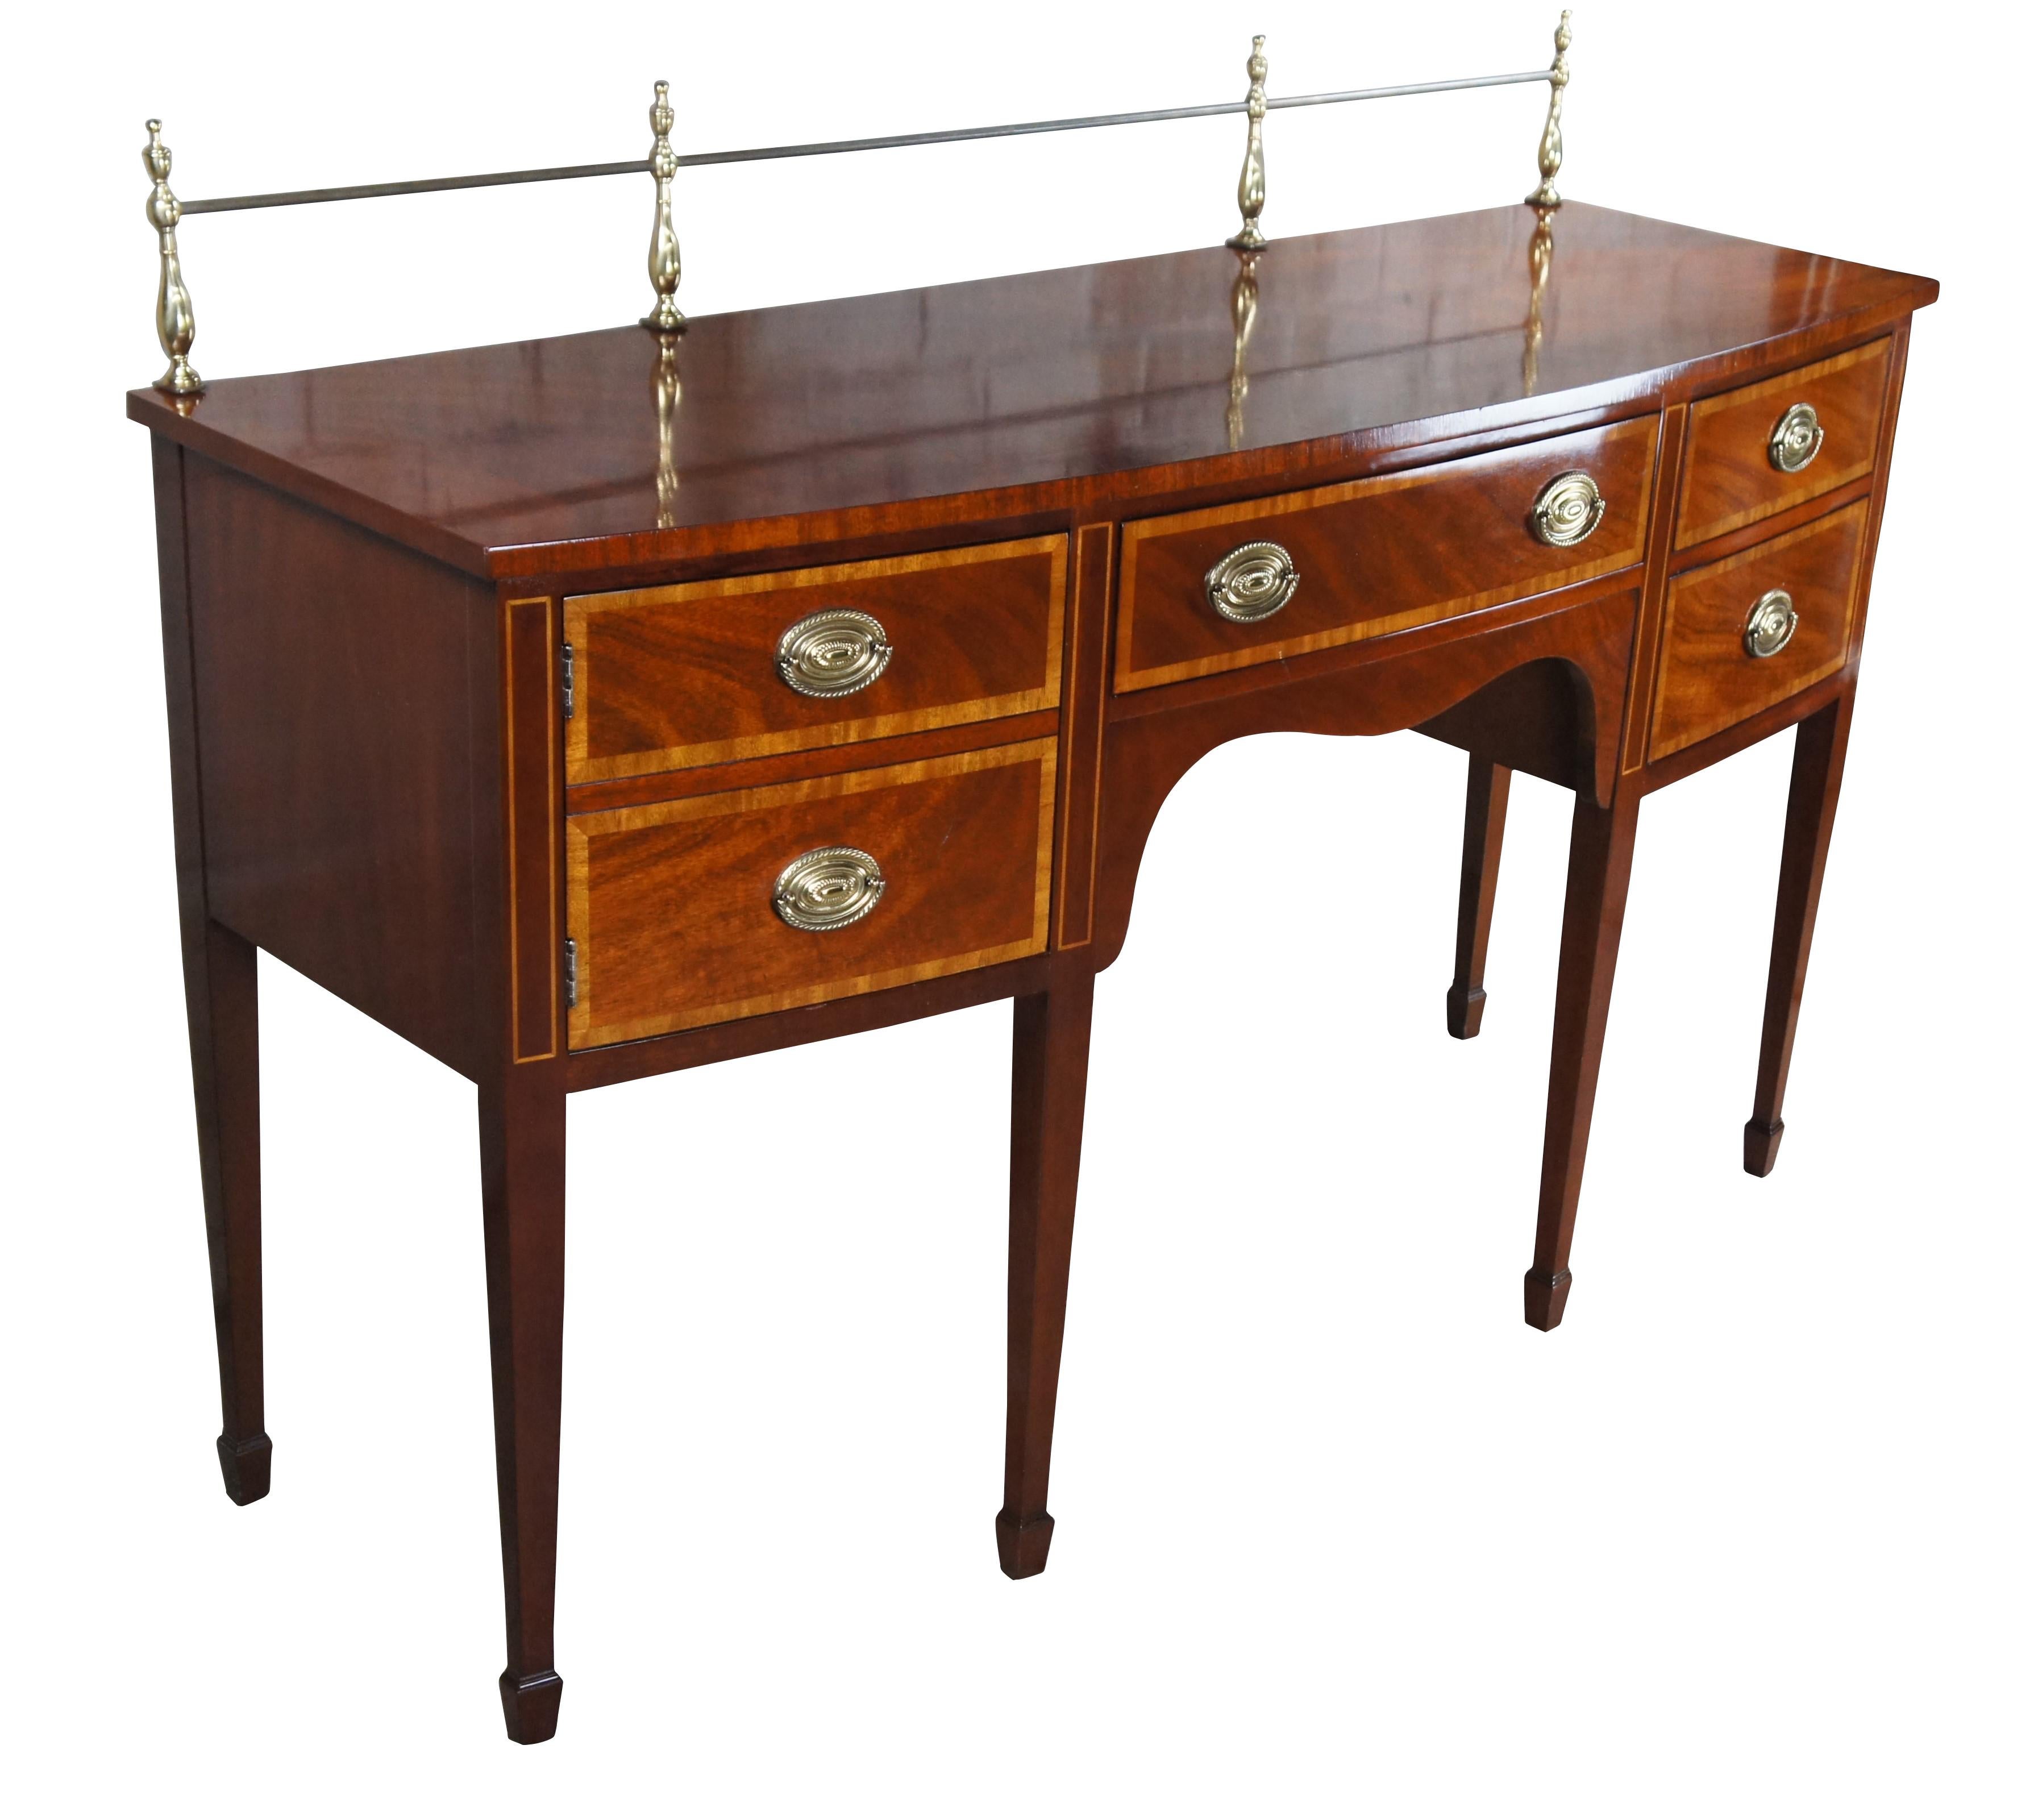 An impressive vintage Kindel Furniture sideboard, circa 1970s. Features a mahogany frame with bowfront, serpentine front, crossbanding, inlay and brass gallery. Includes five dovetailed drawers with oval brass Sheraton / Federal style drawer pulls.